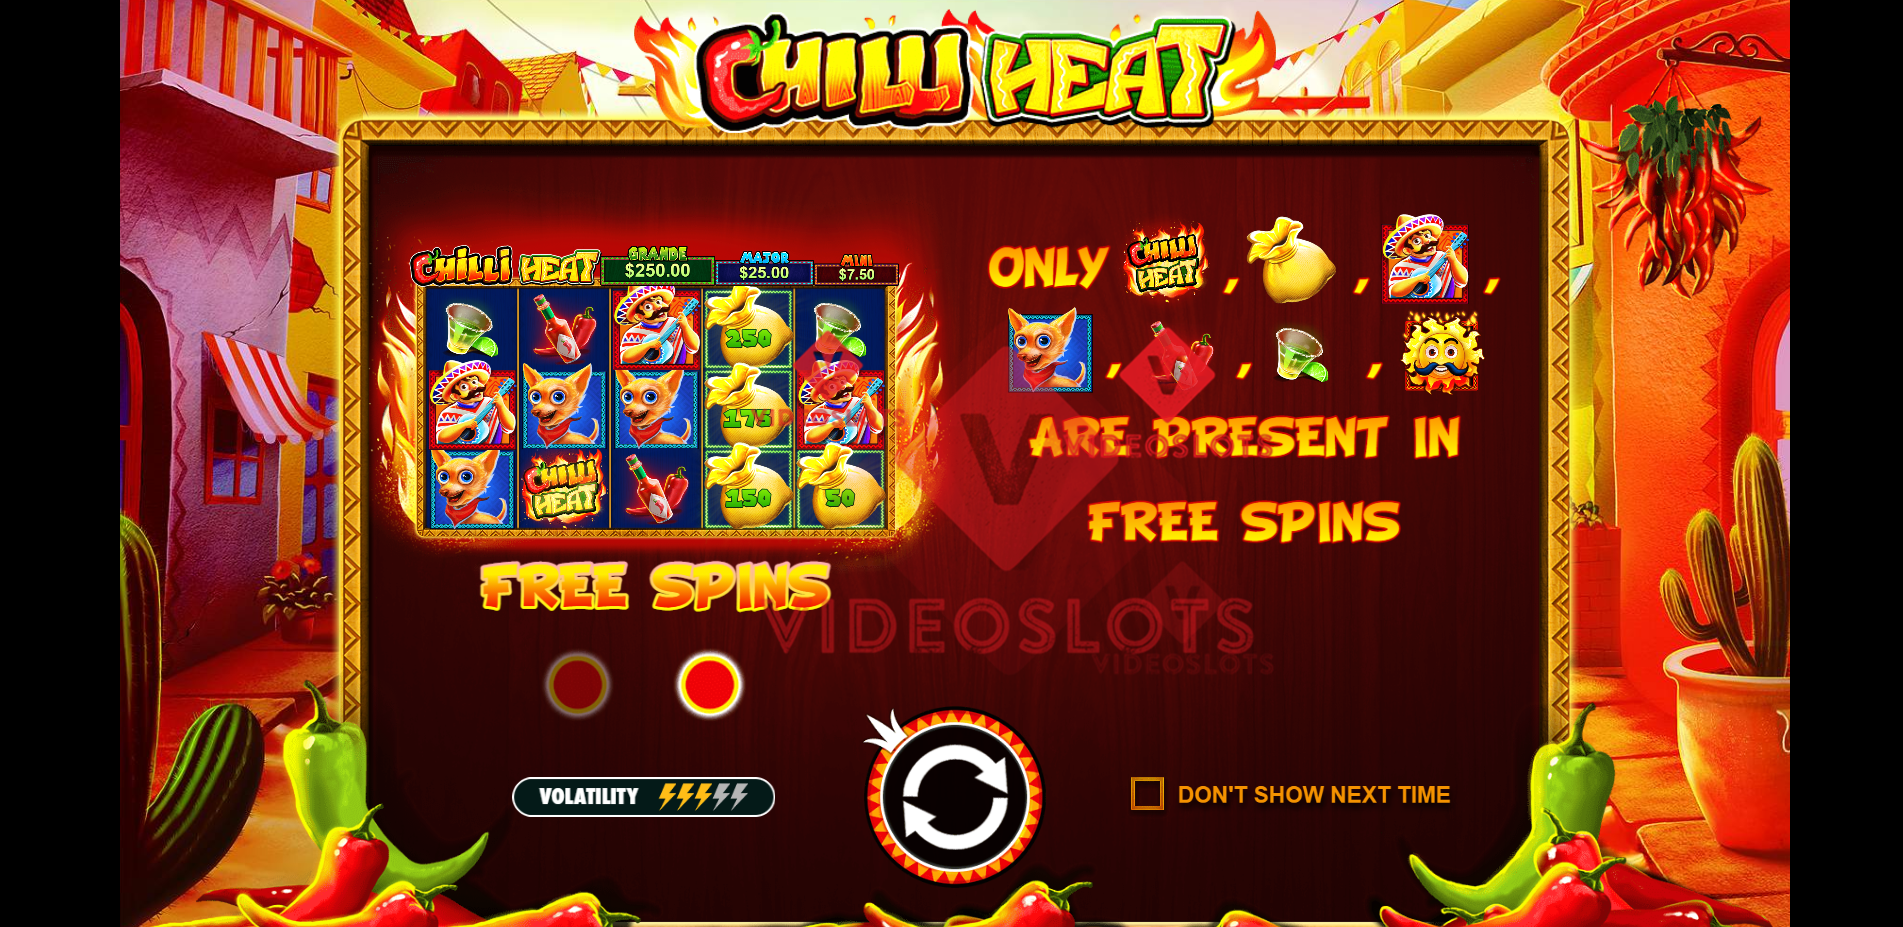 Game Intro for Chilli Heat slot by Pragmatic Play